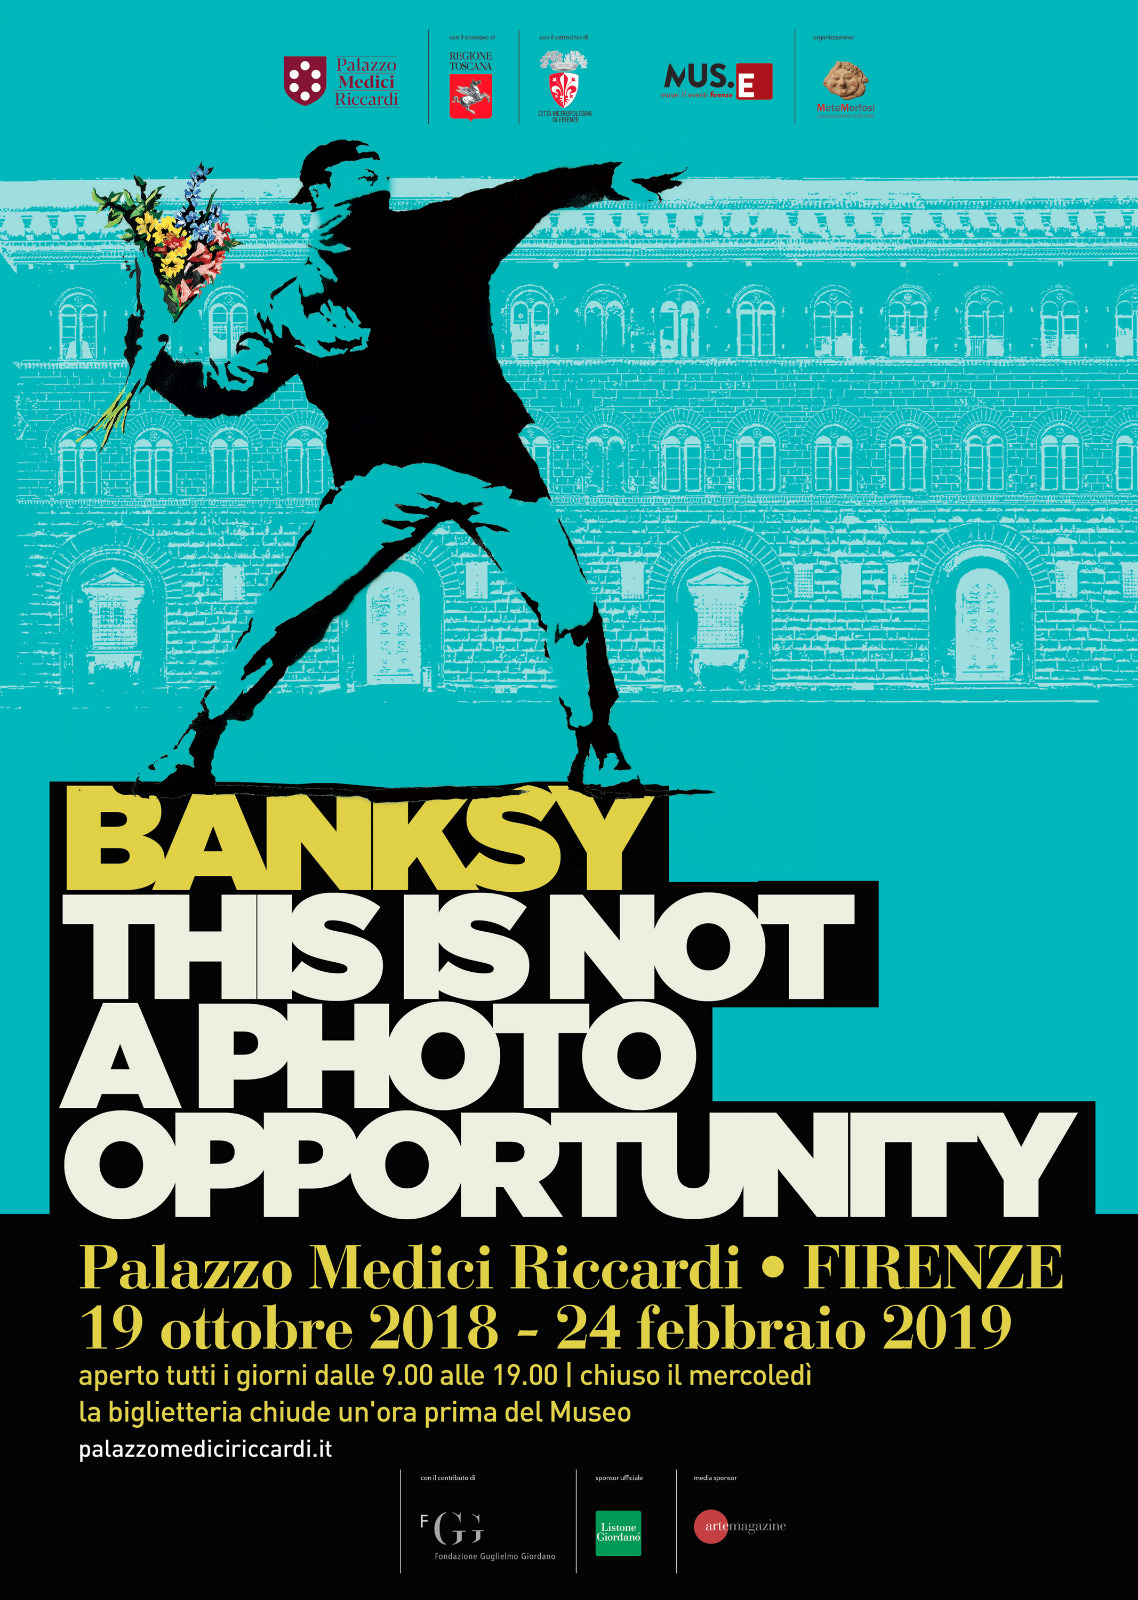 Palazzo Medici Riccardi, 20 opere di Banksy in mostra in 'This is not a photo opportunity'